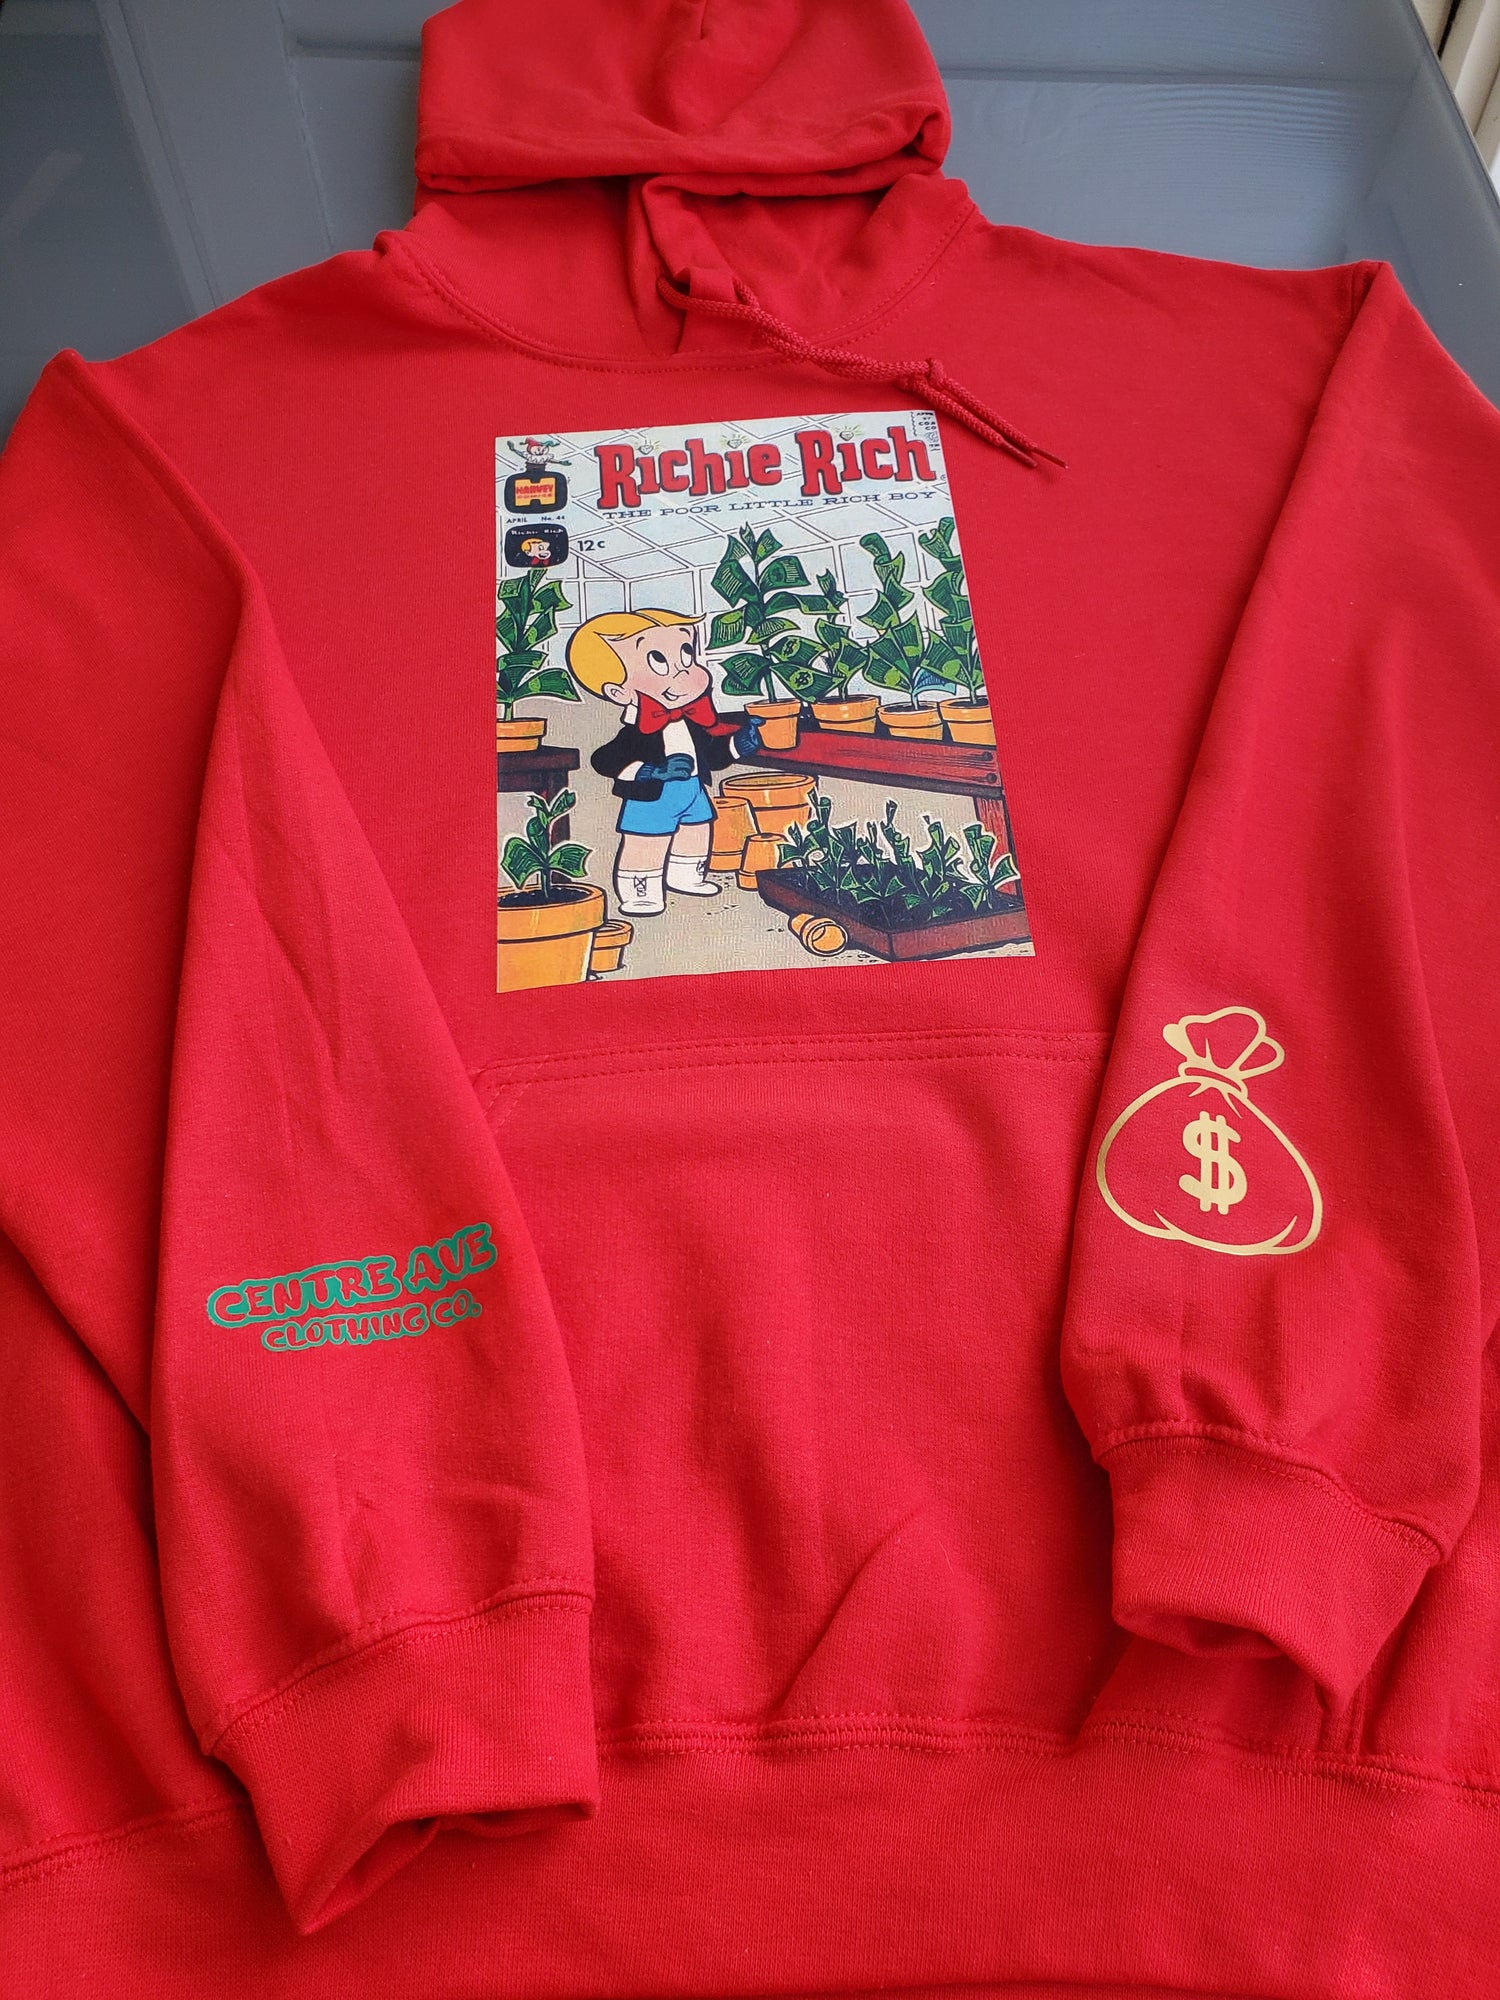 Money Trees Vintage Hoodie - Centre Ave Clothing Co.